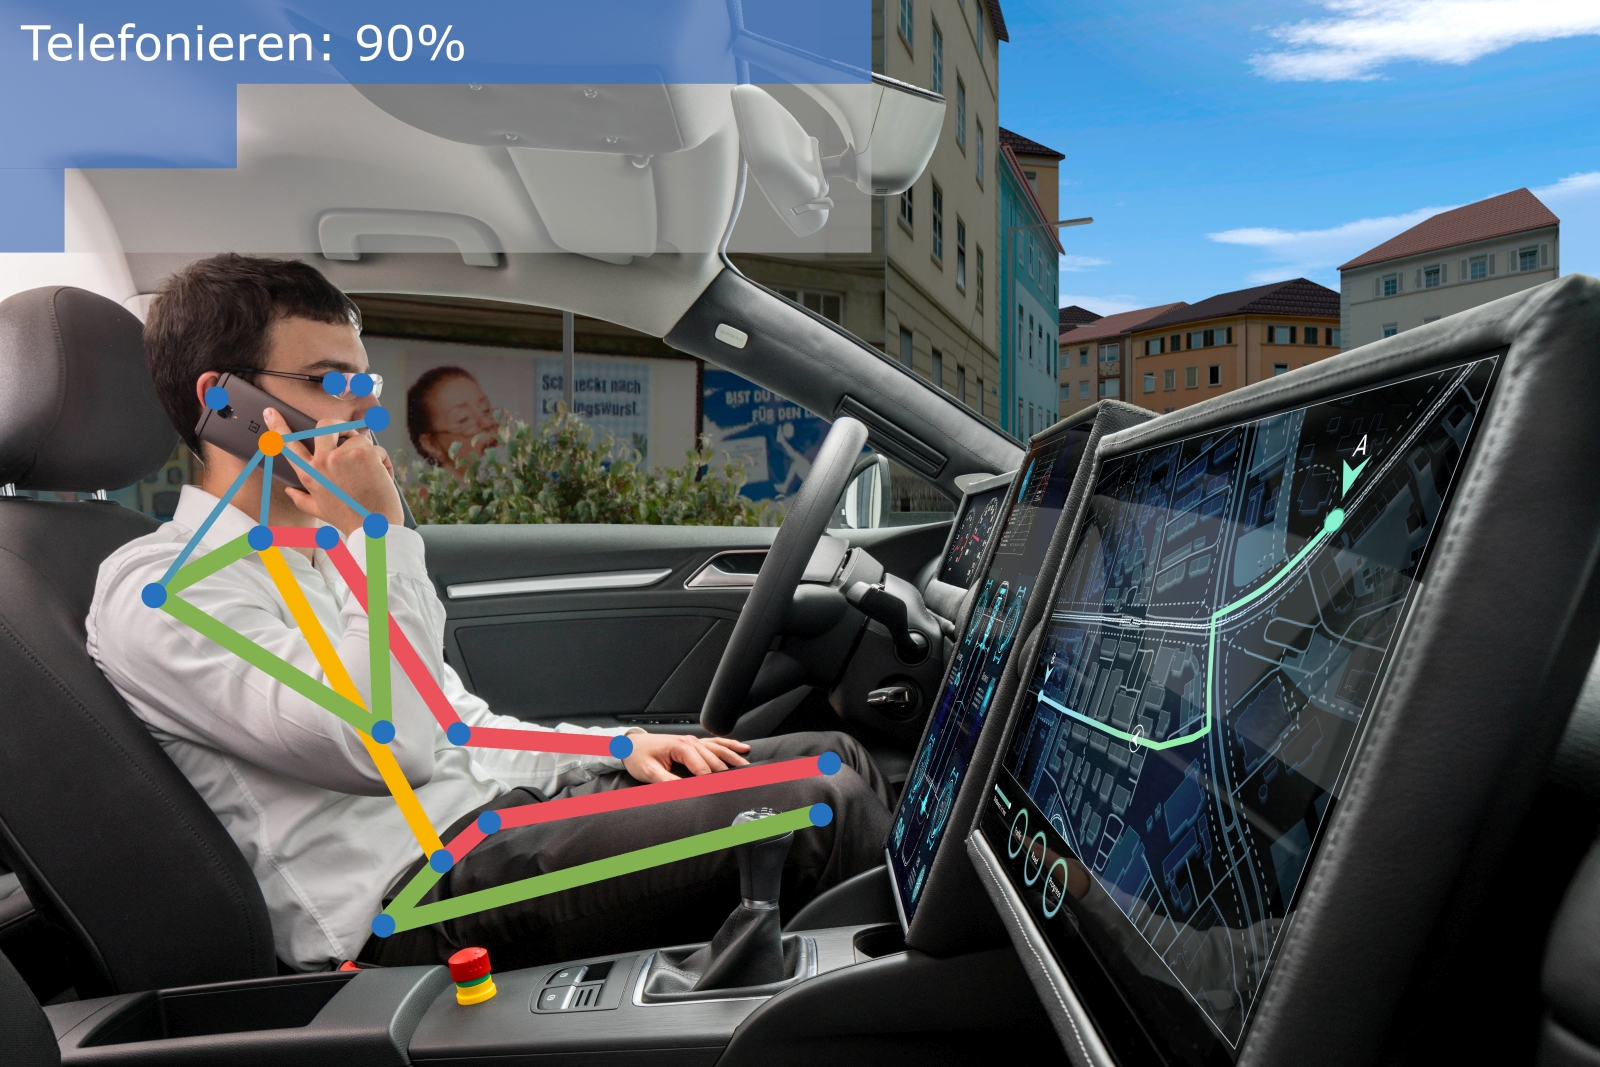 In addition to the body poses of all passengers, the occupant monitoring system developed by Fraunhofer IOSB also detects activities and associated objects.